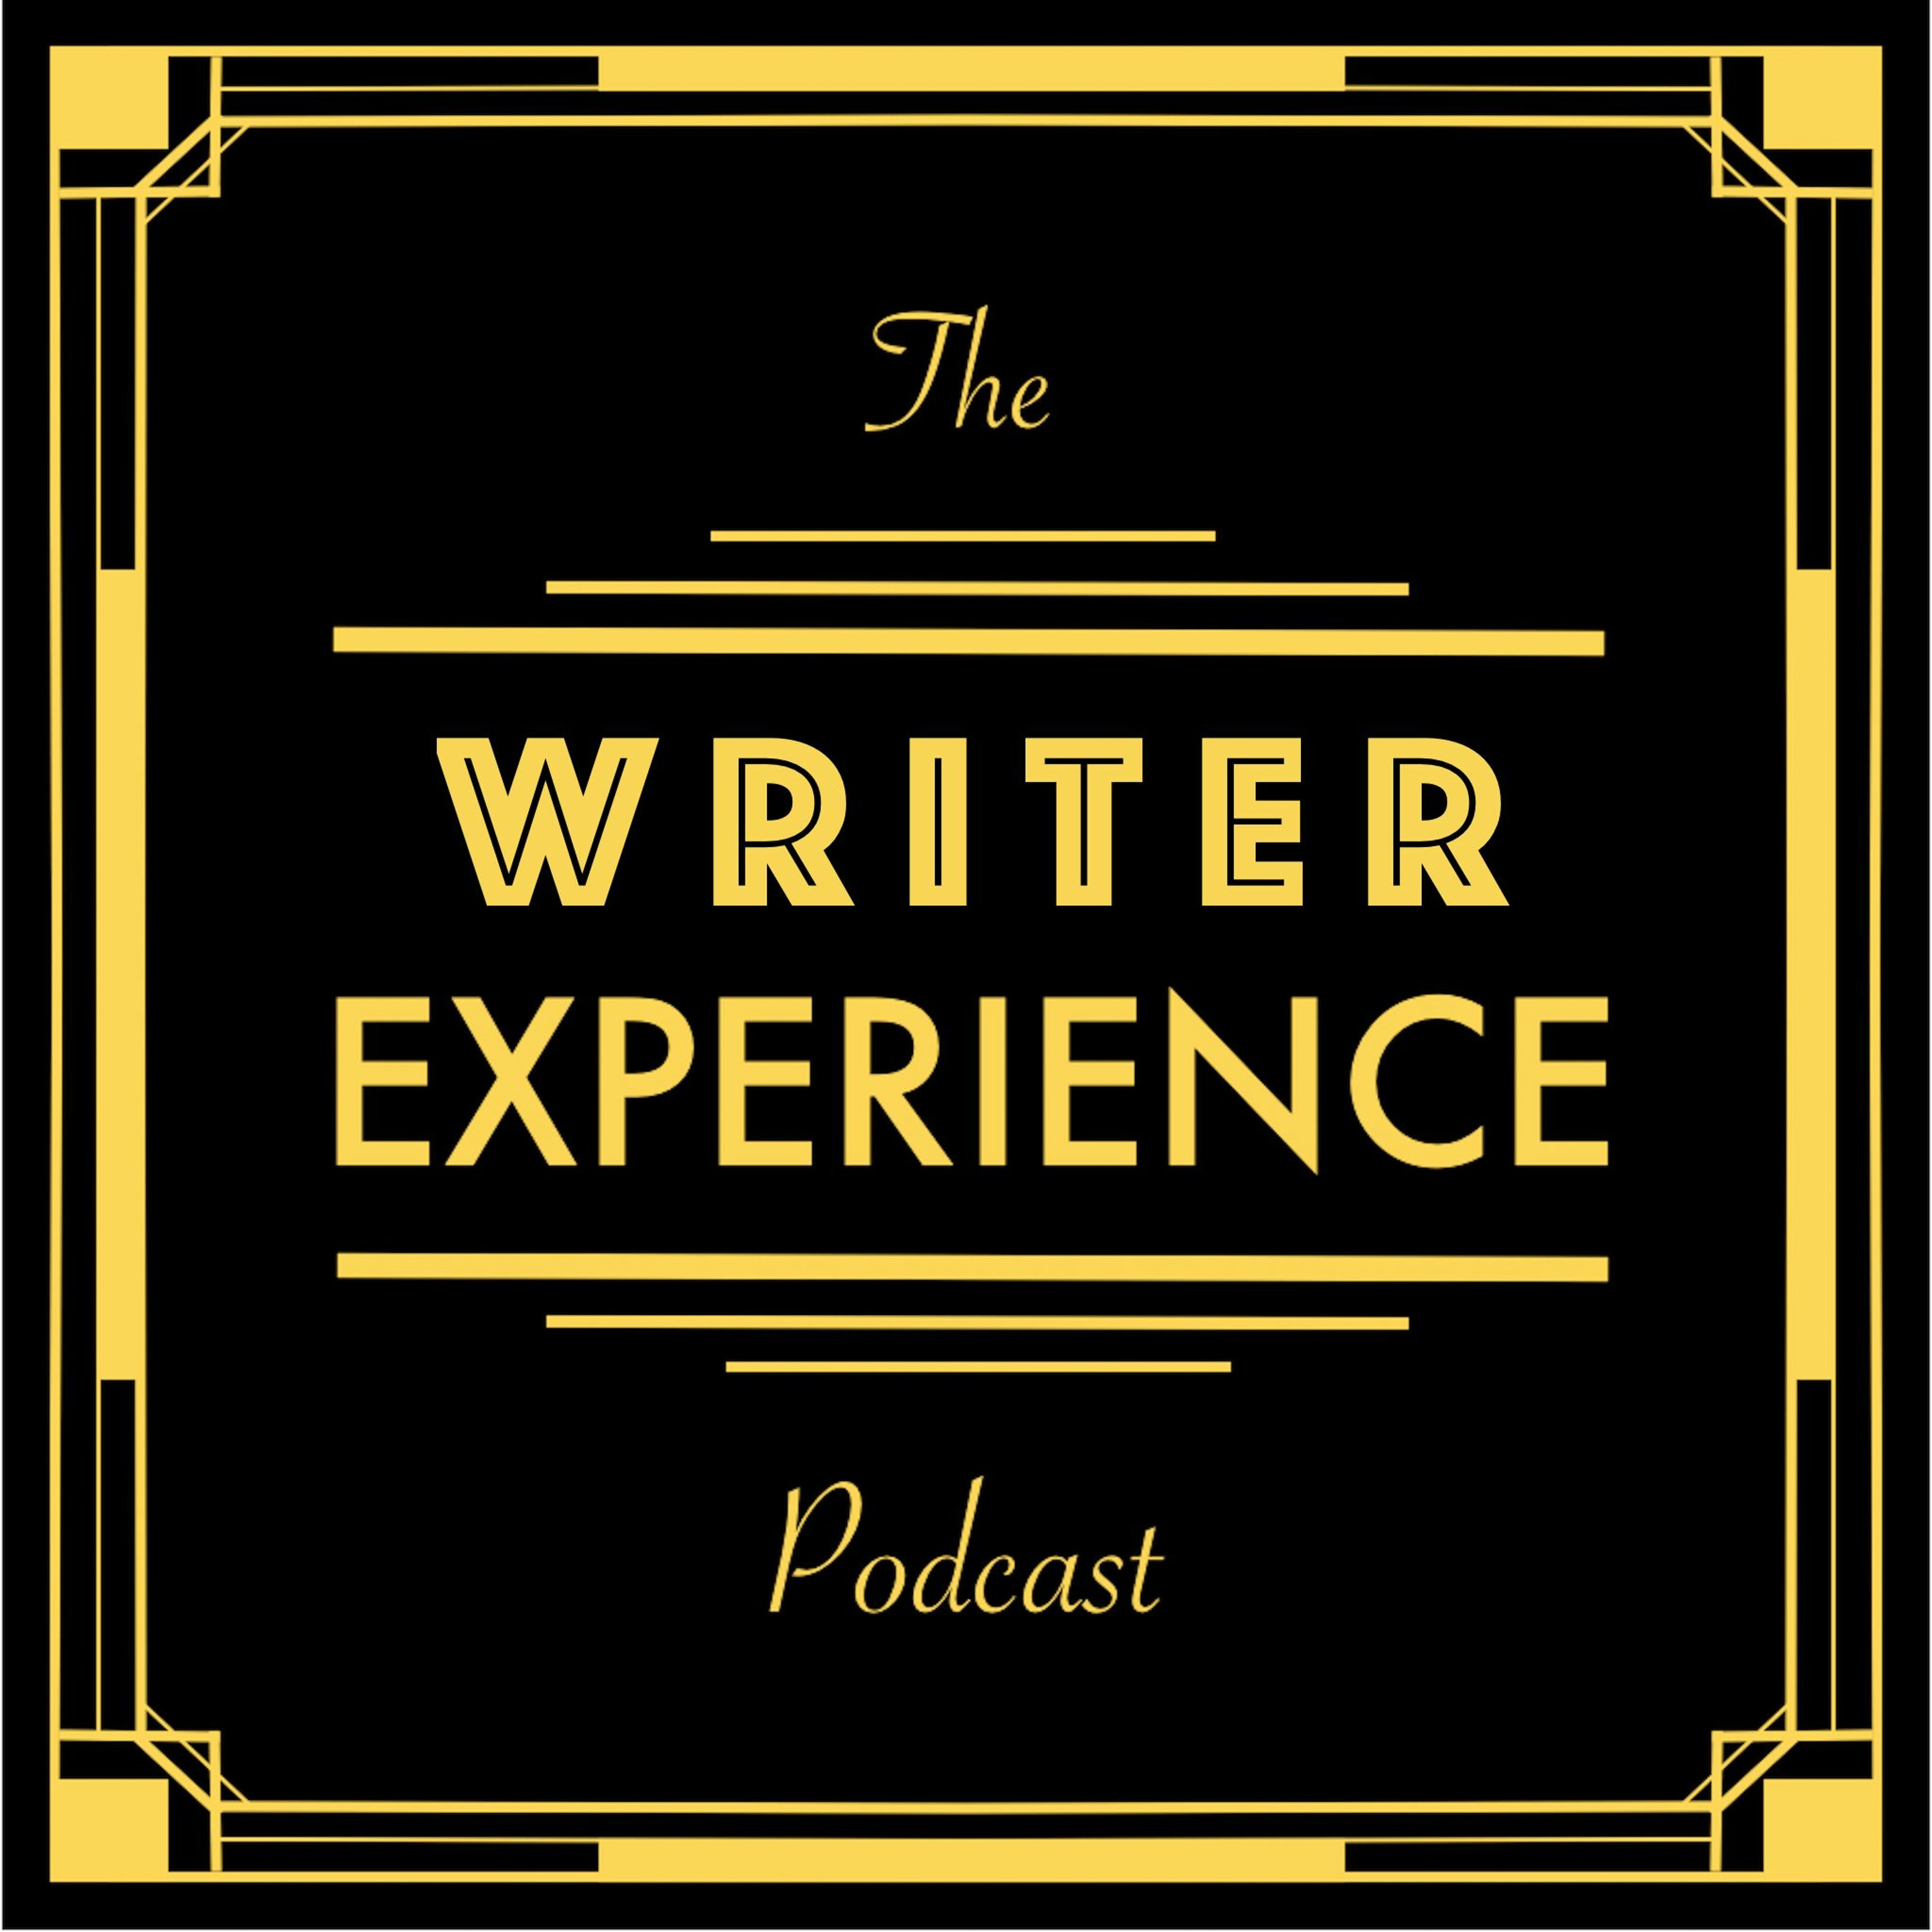 Ep 12 - How to Write Interactive Fiction 101 with Christopher Webster, Co-Founder of StoryFix Media